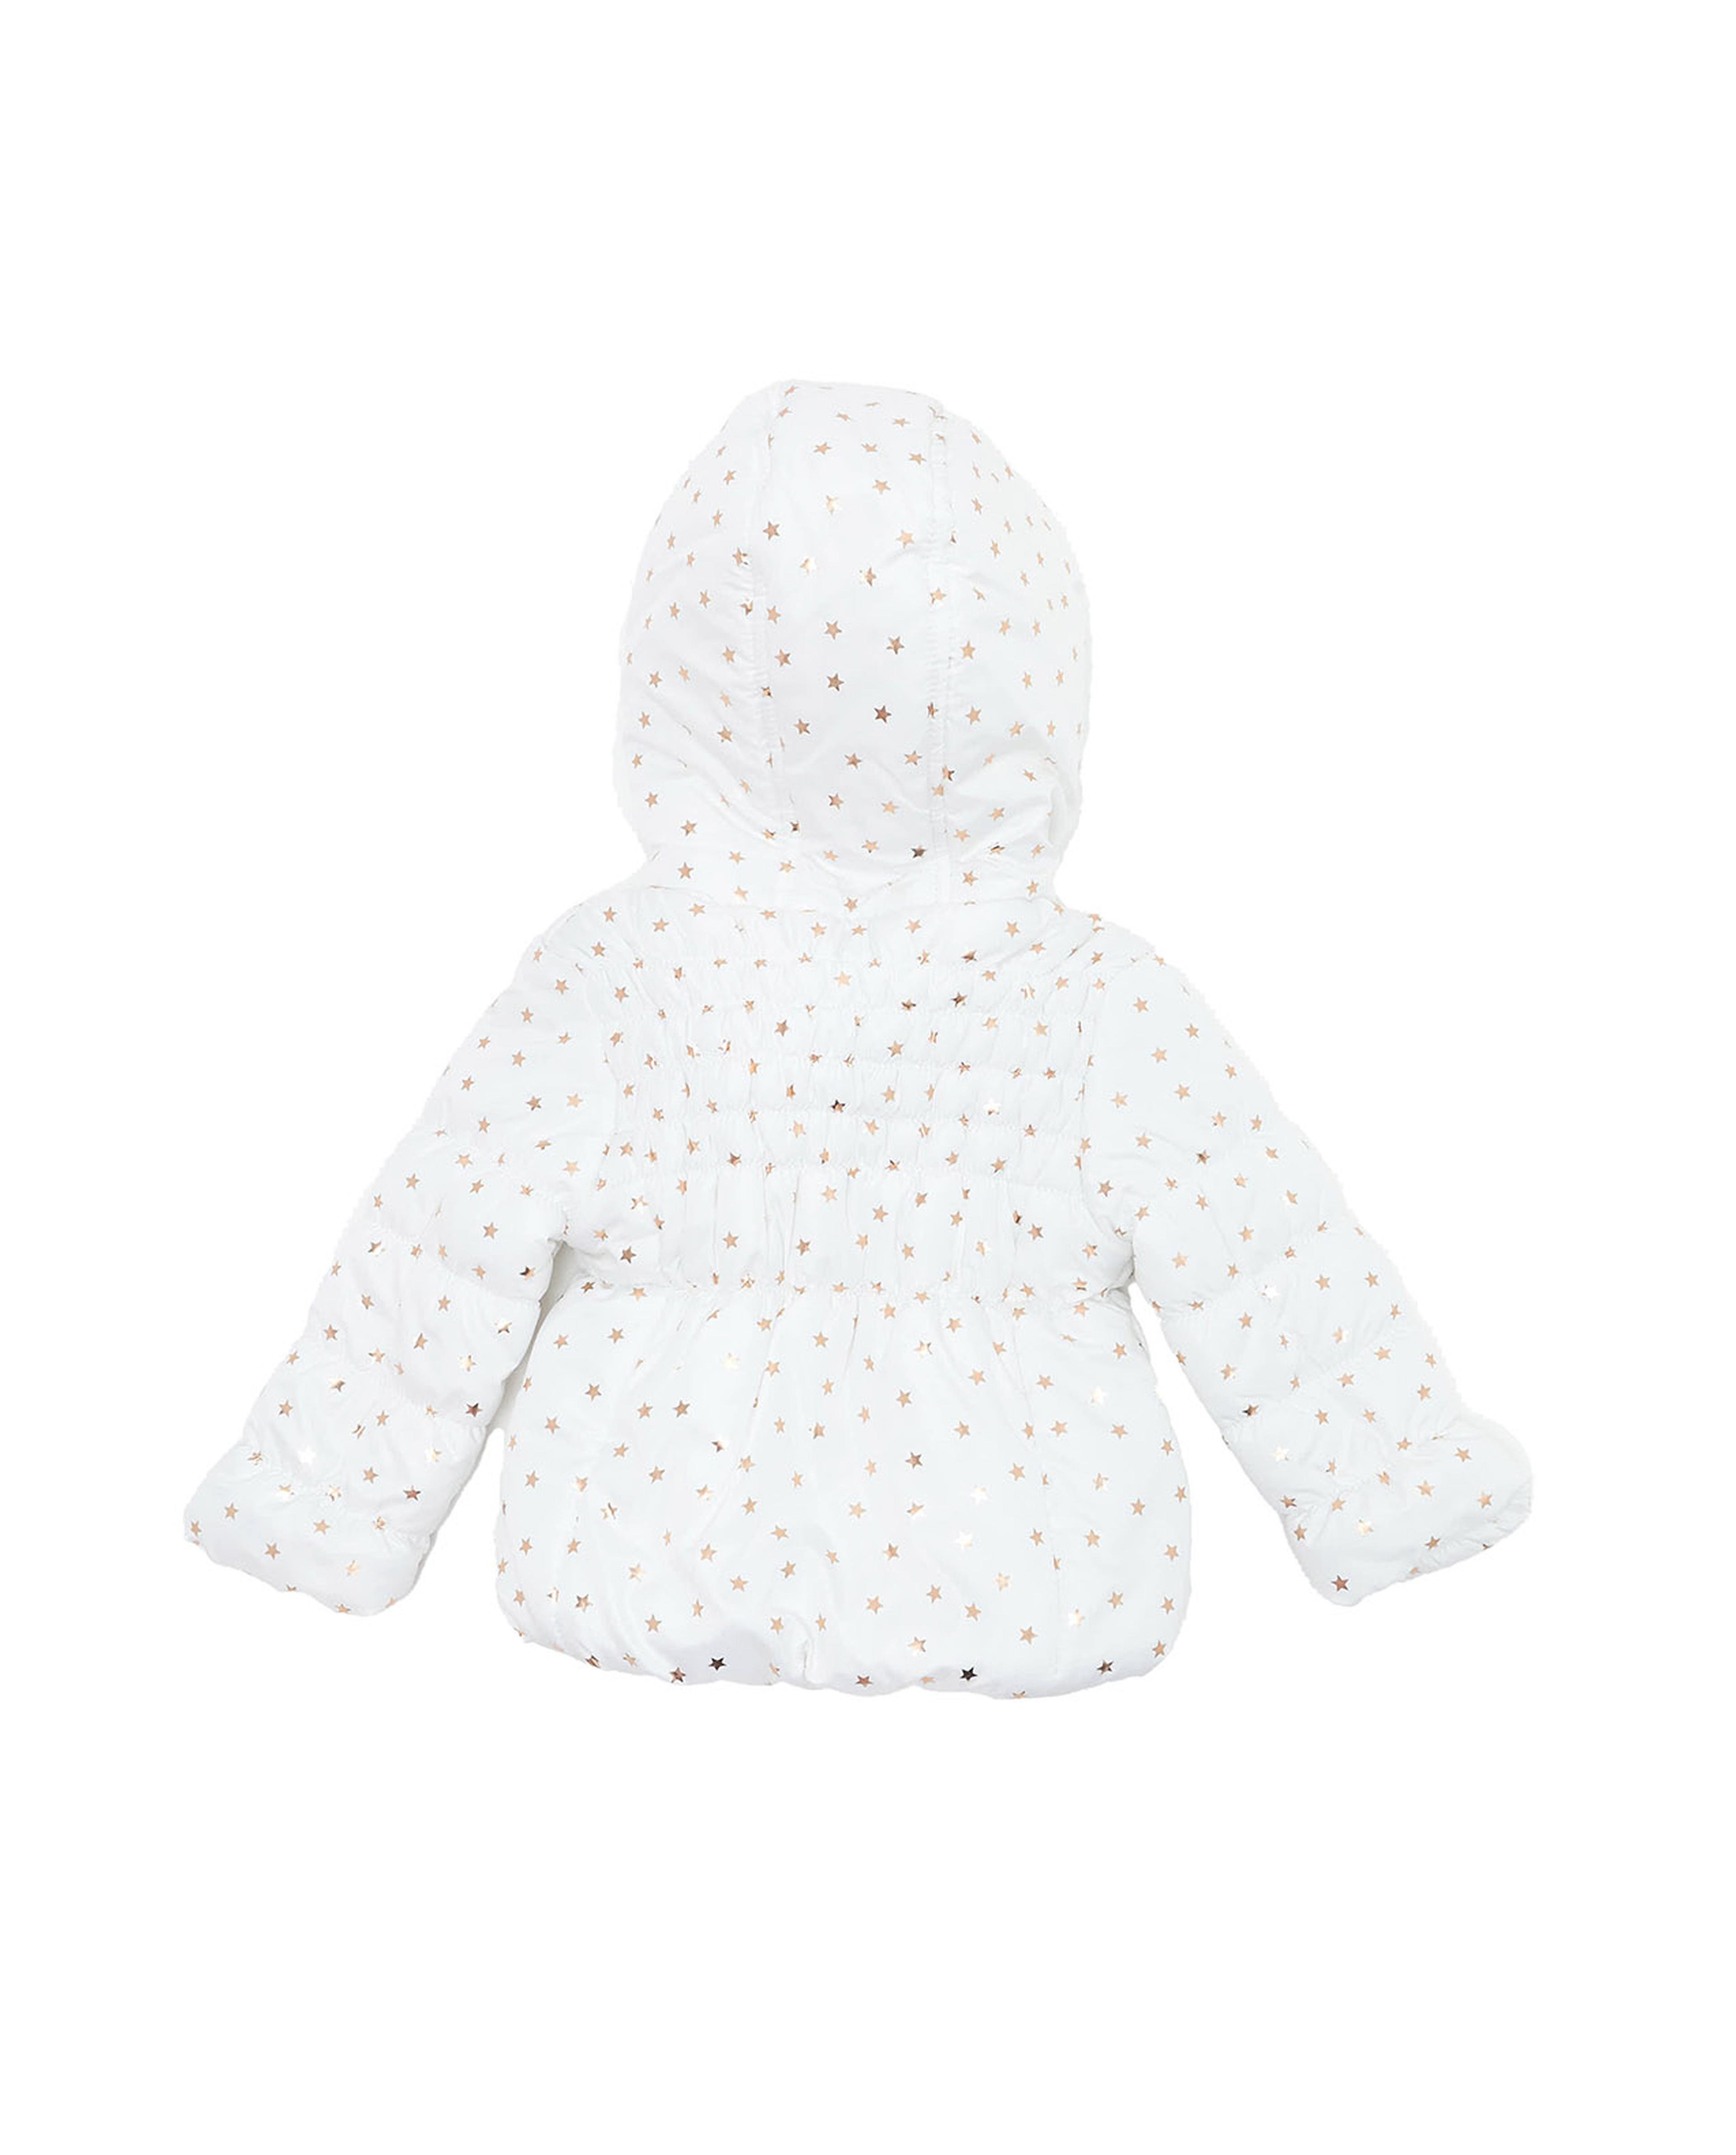 Star Print Hooded Jacket with Zipper Closure